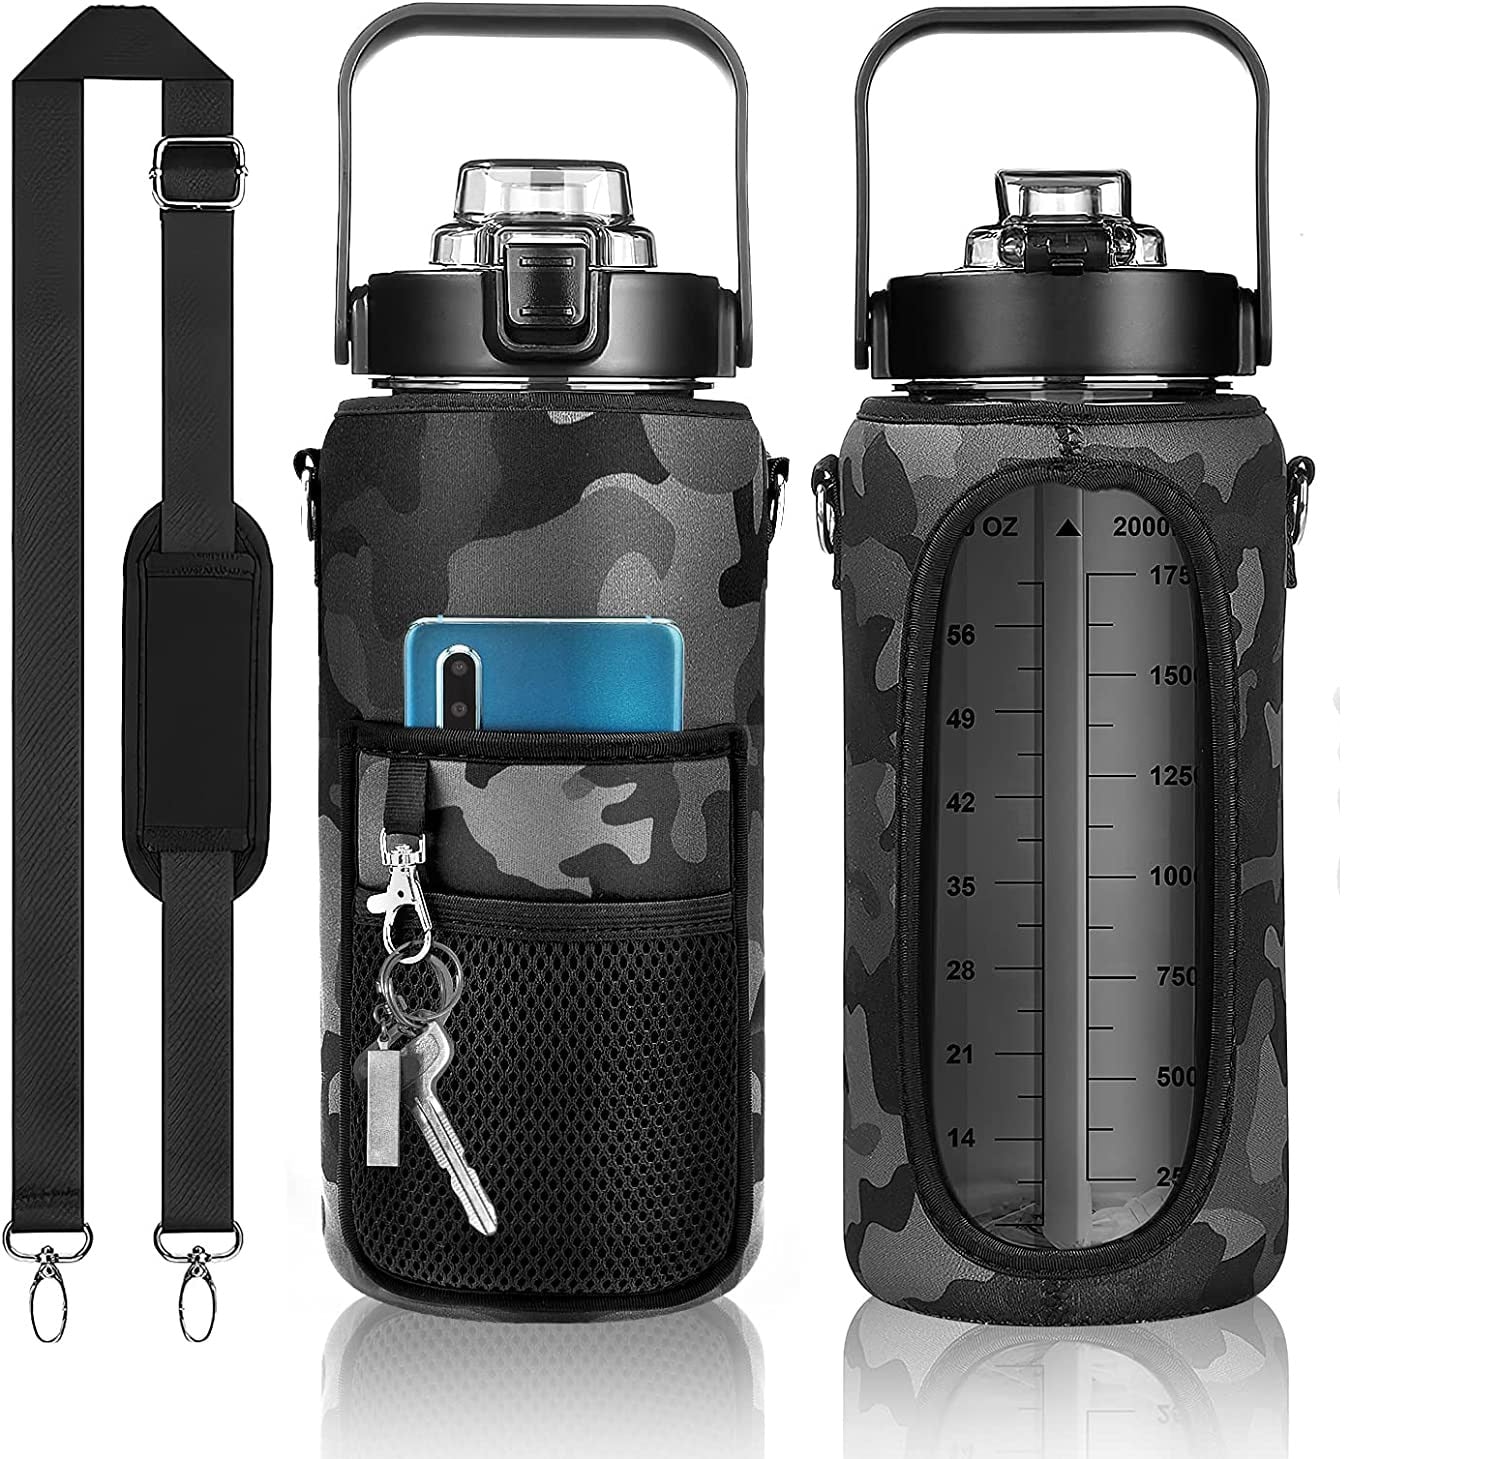 2 Liters Water Bottle with Sleeve